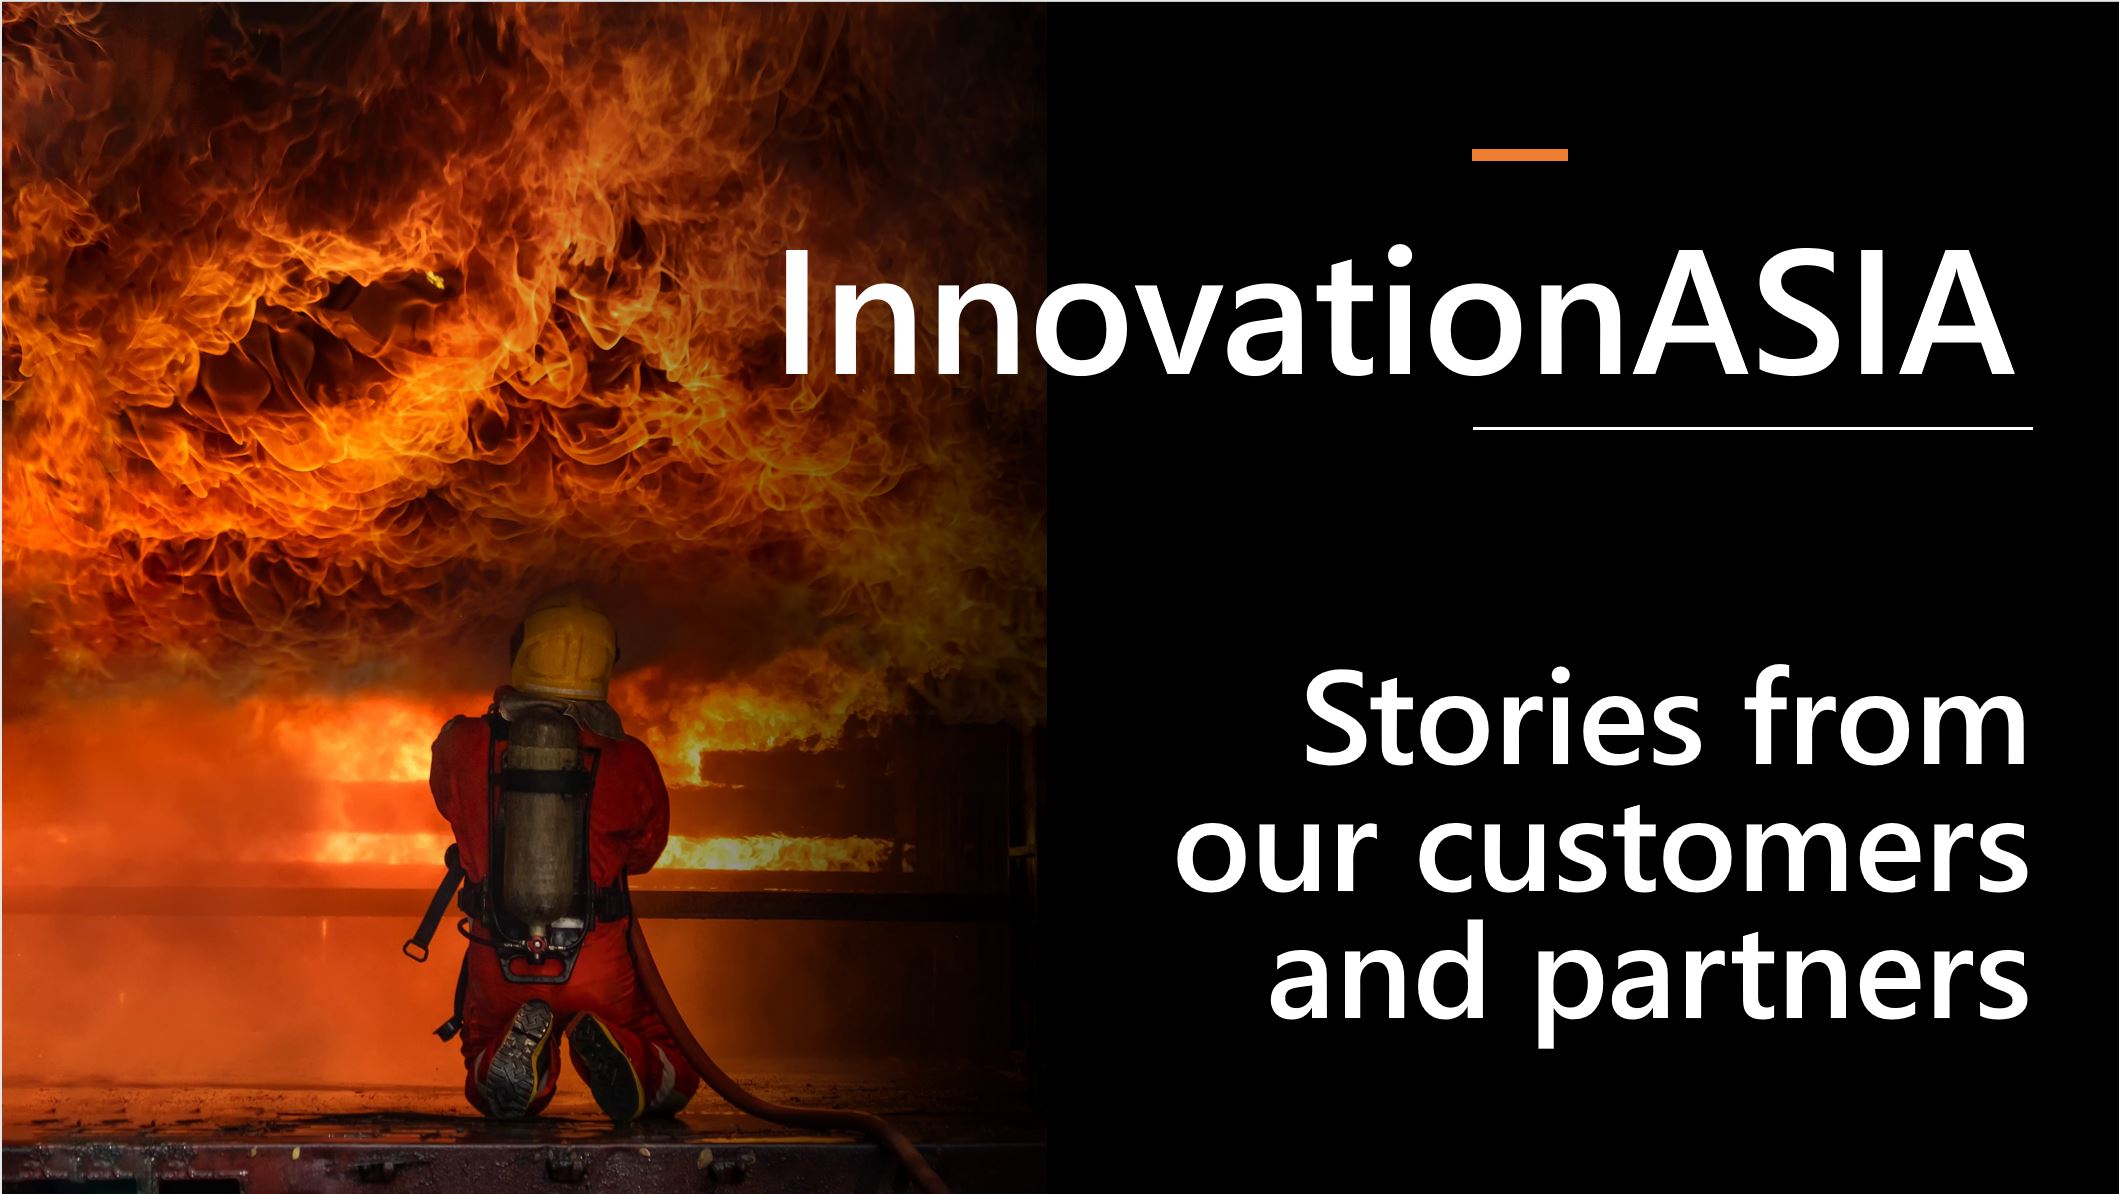 Innovation Asia. Stories from our customers and partners